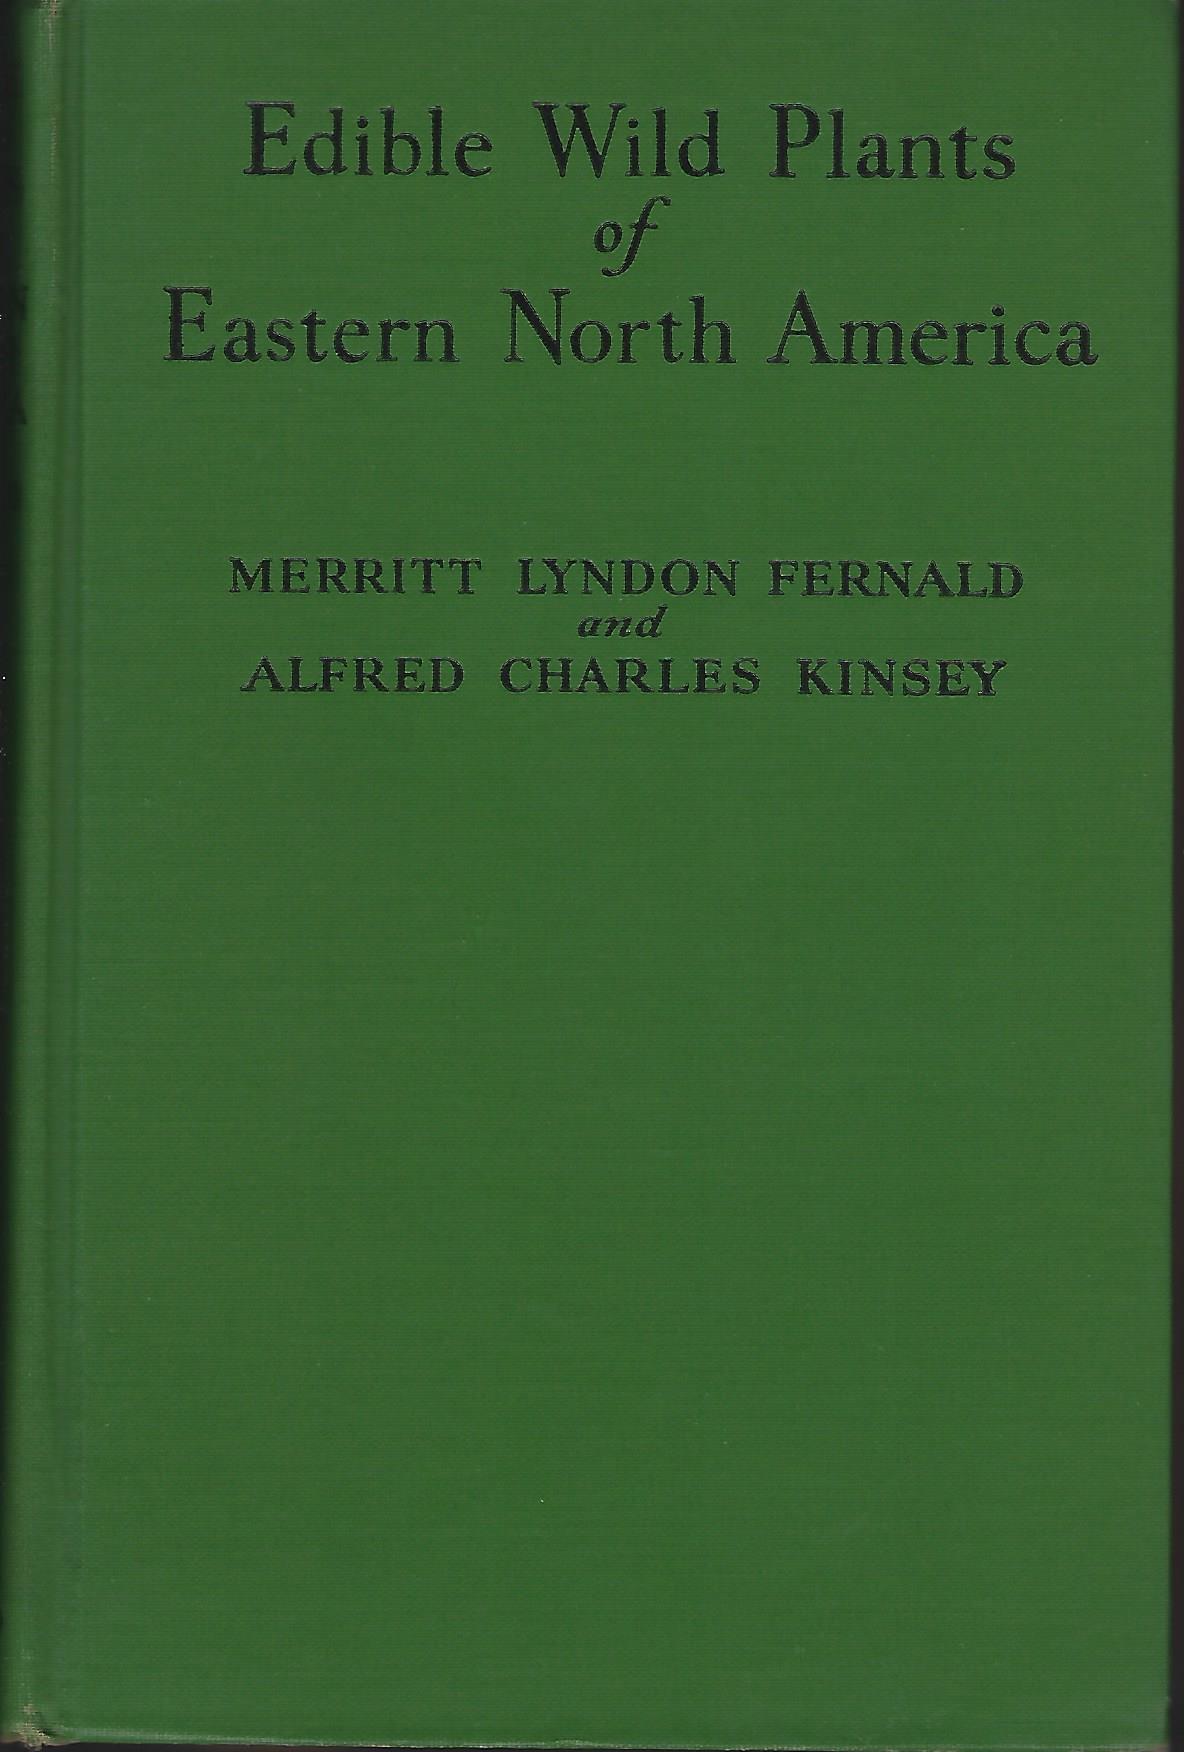 Image for Edible Wild Plants of Eastern North America (Alan Davidson's copy)